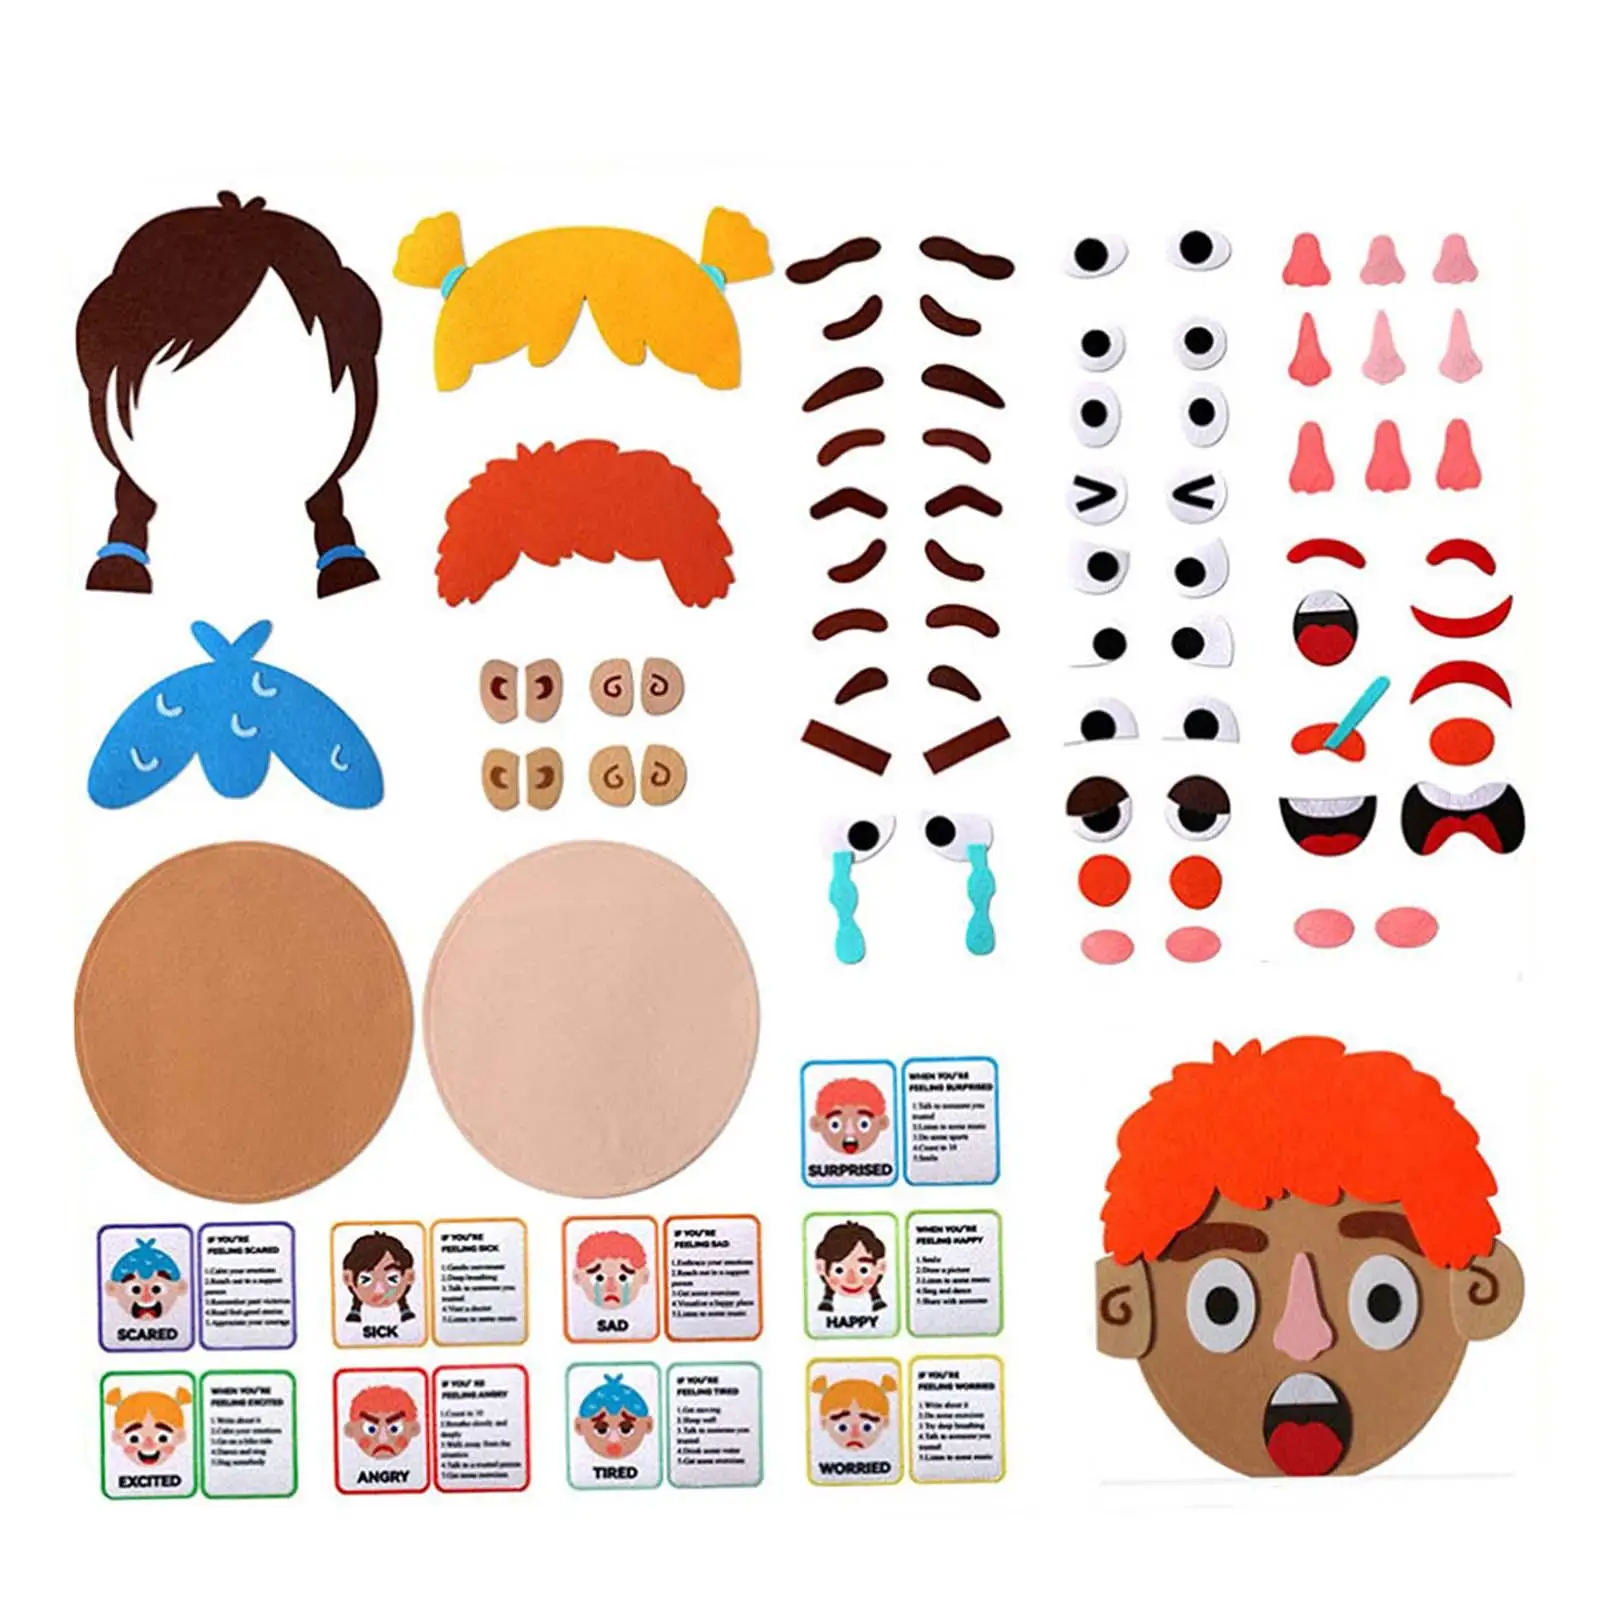 Social Emotional Learning with 75 Facial Expressions and 9 Emotional Flashcards Faces Games for Kids Children Boys Girls Ages 3+